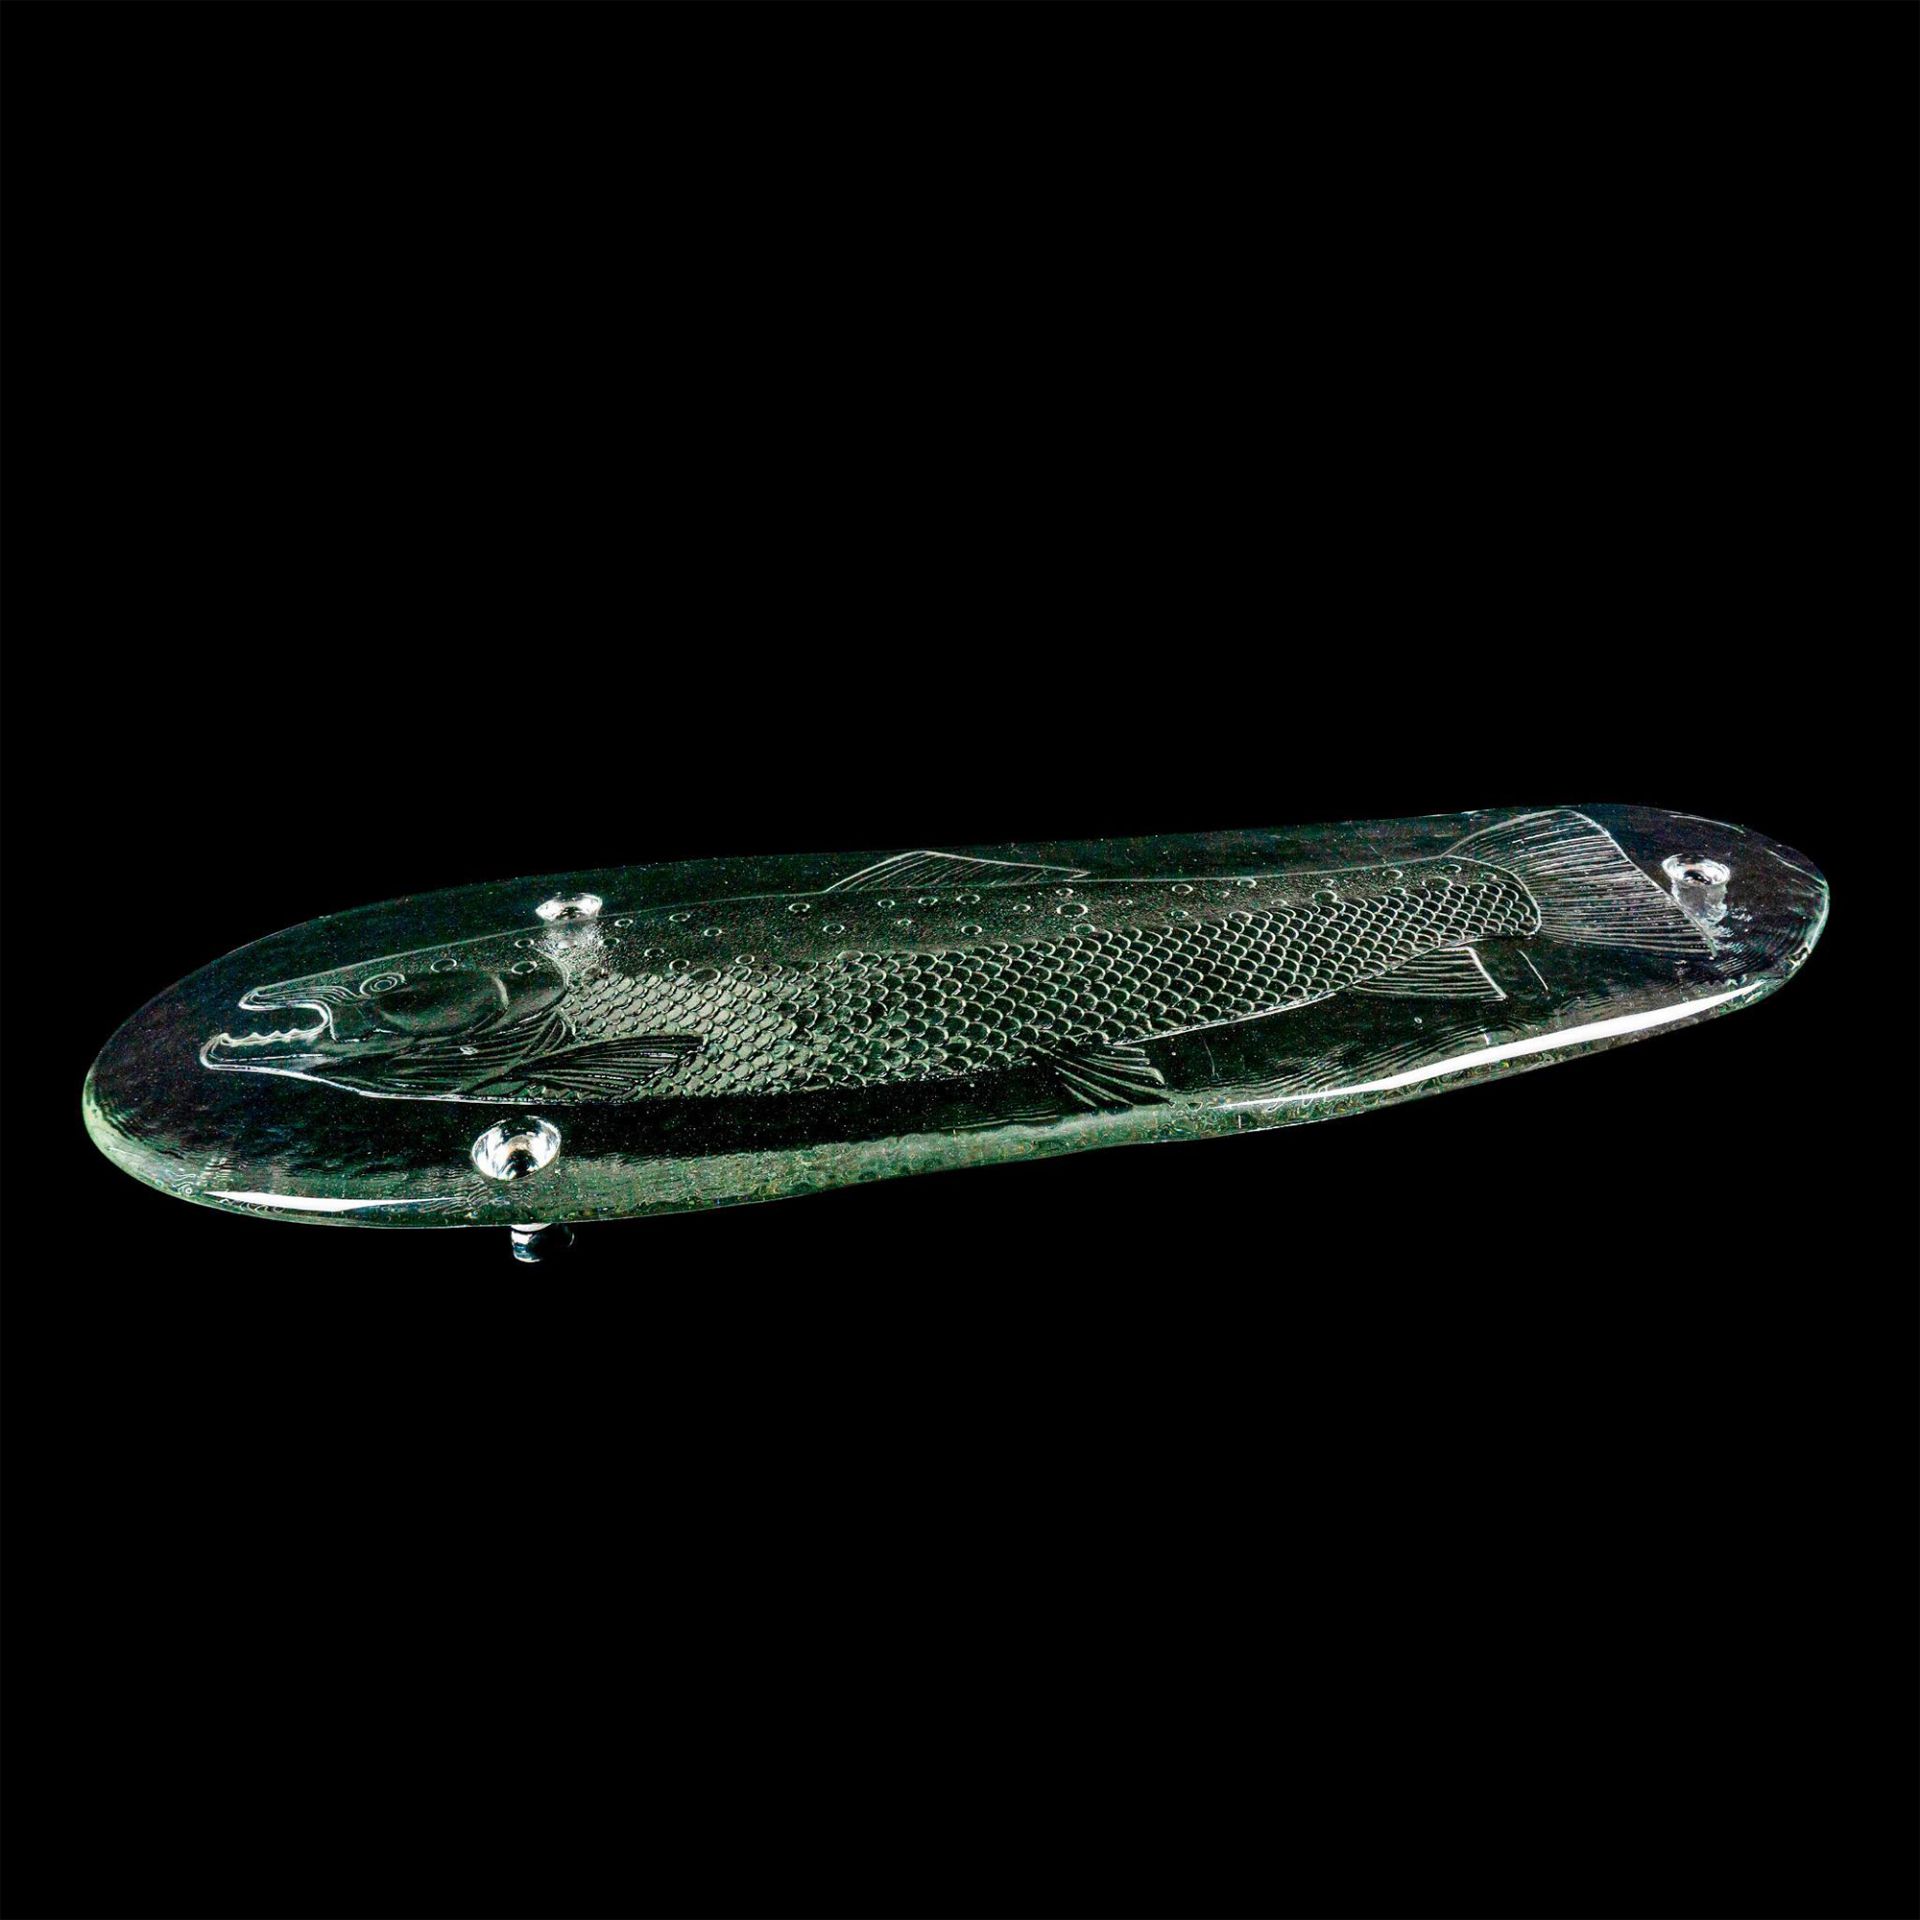 Etched Glass Fish Serving Platter - Image 3 of 3